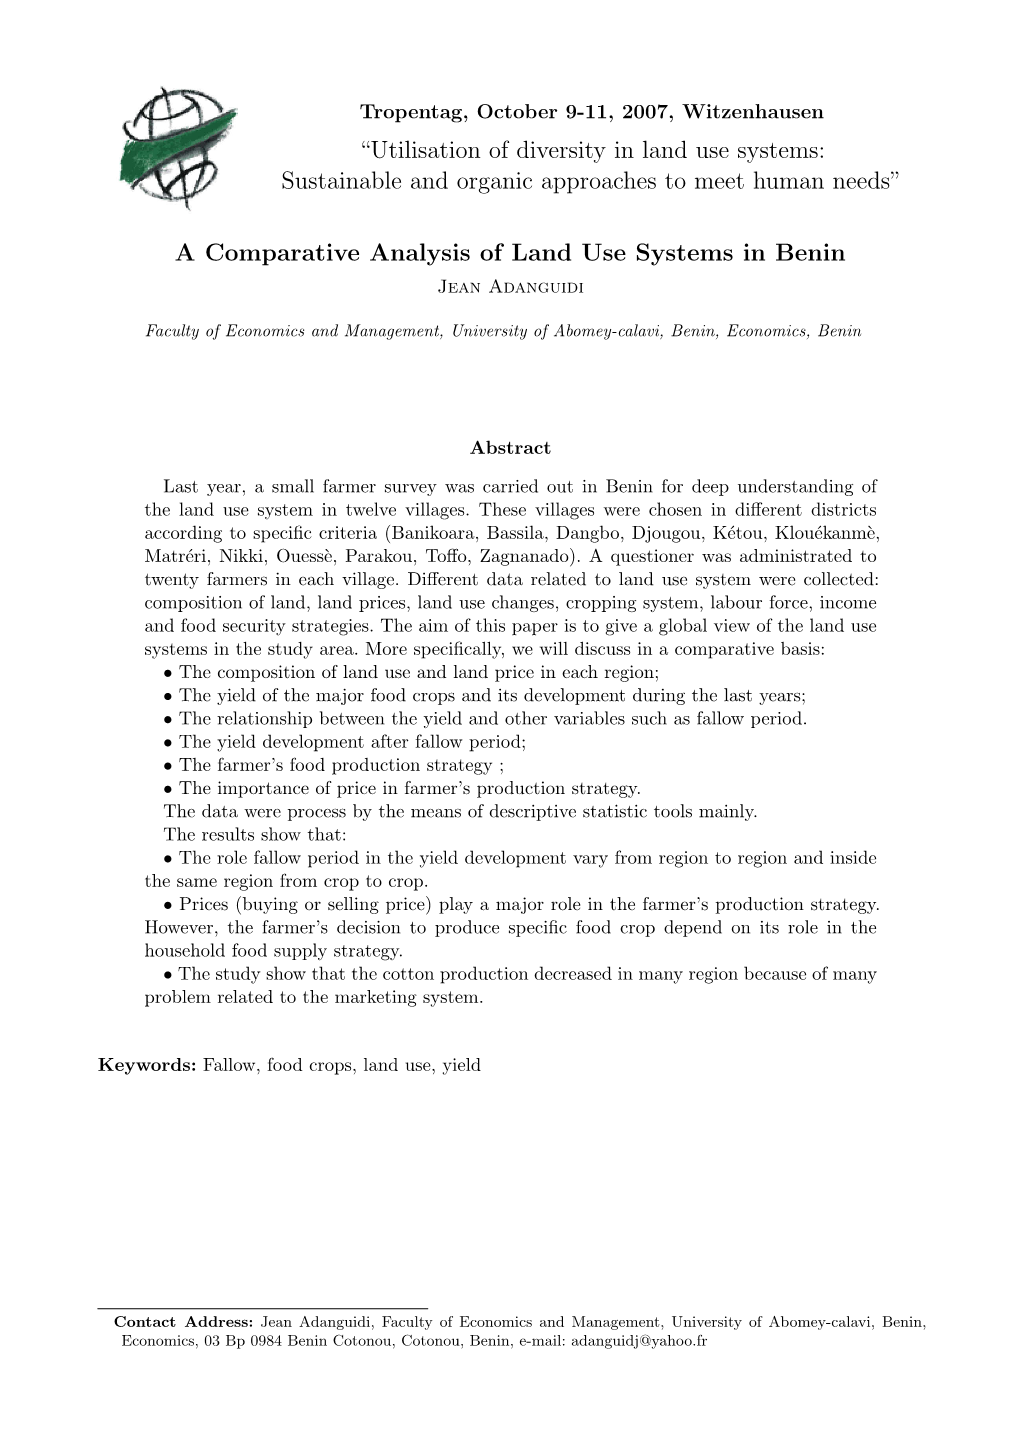 A Comparative Analysis of Land Use Systems in Benin Jean Adanguidi